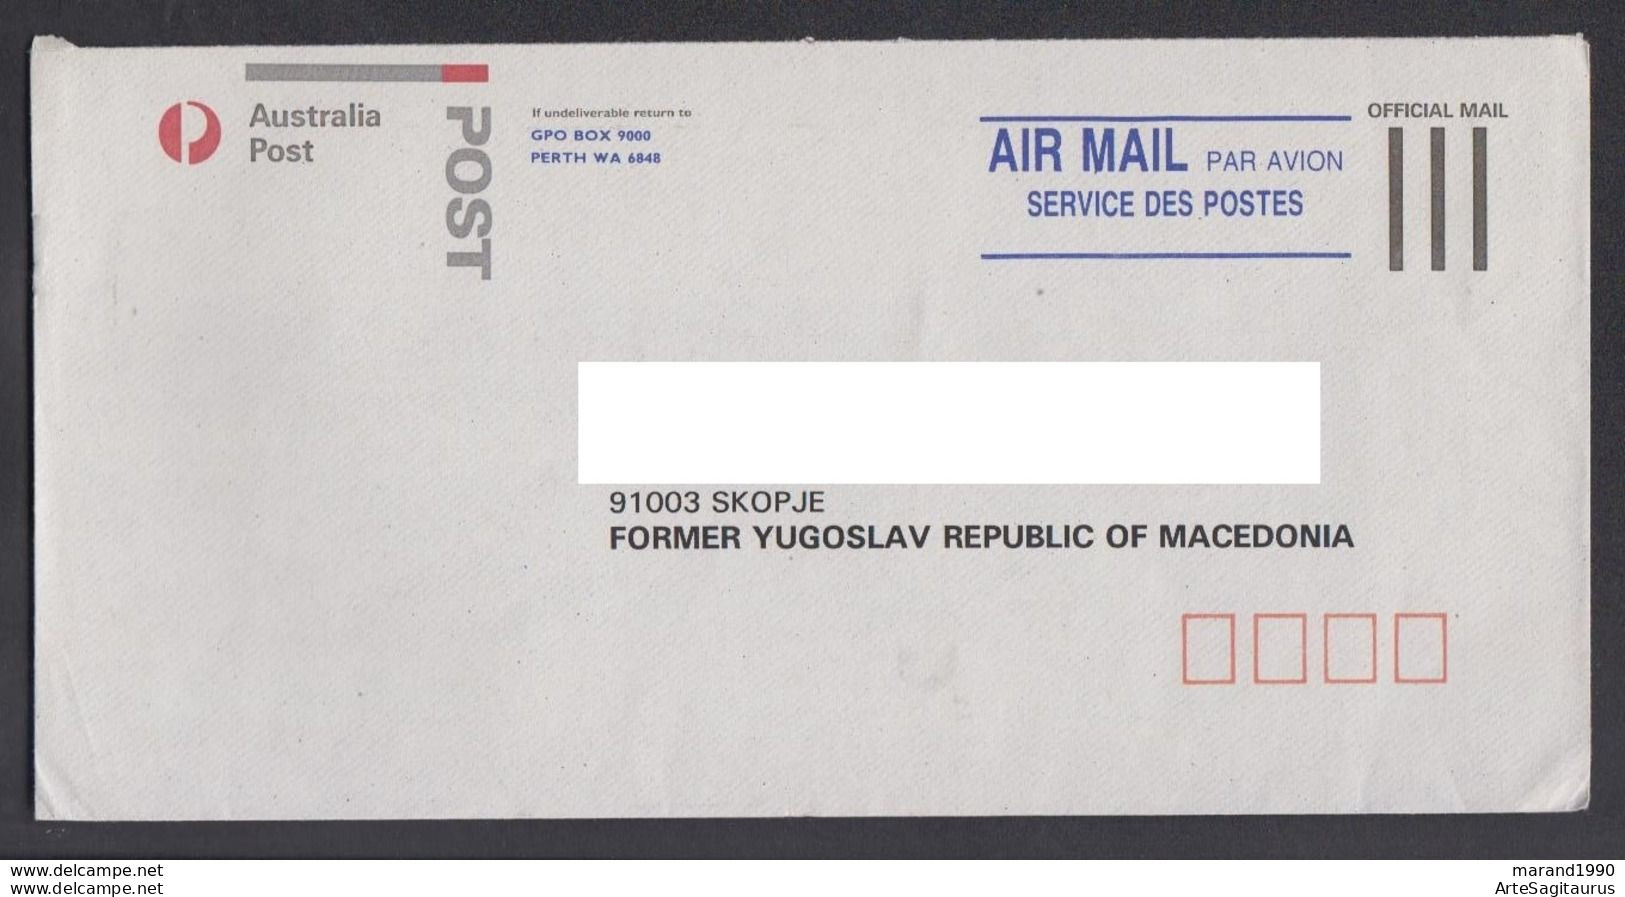 AUSTRALIA AIR MAIL OFFICIAL MAIL MACEDONIA  (007) - Oficiales